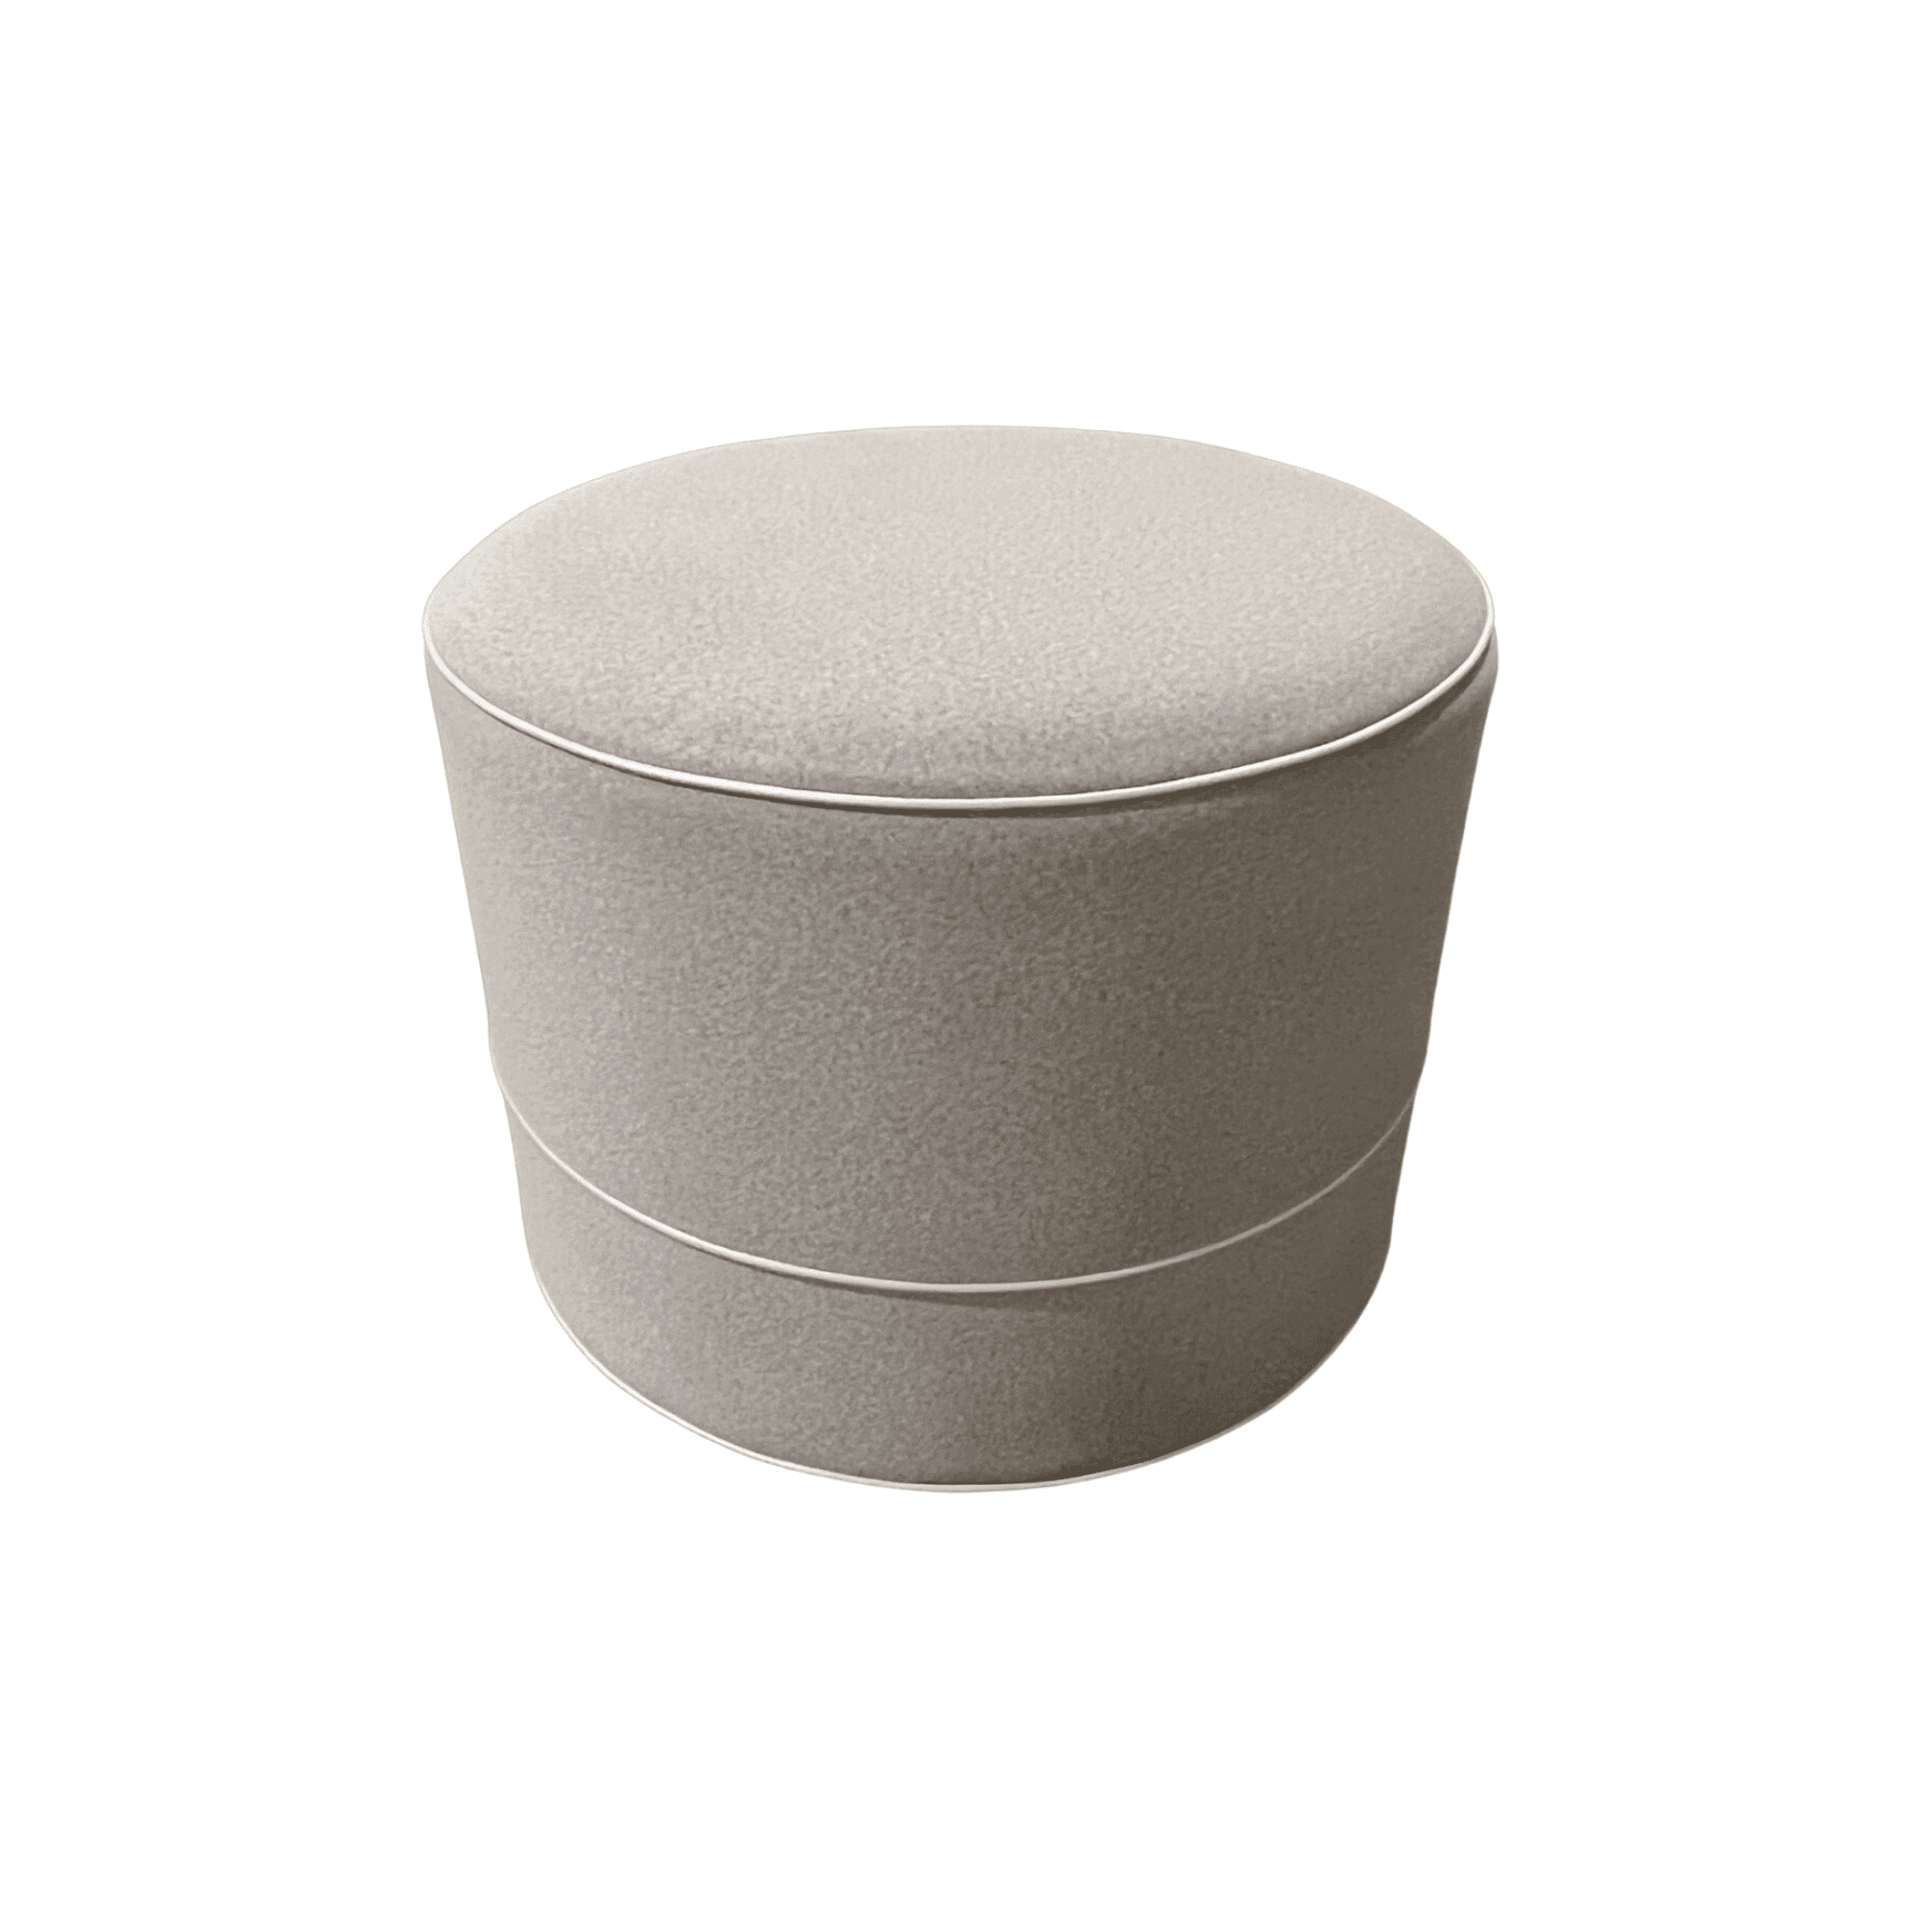 FOSTER Upholstered Stool, Luxury Furniture - Blend Home Furnishings